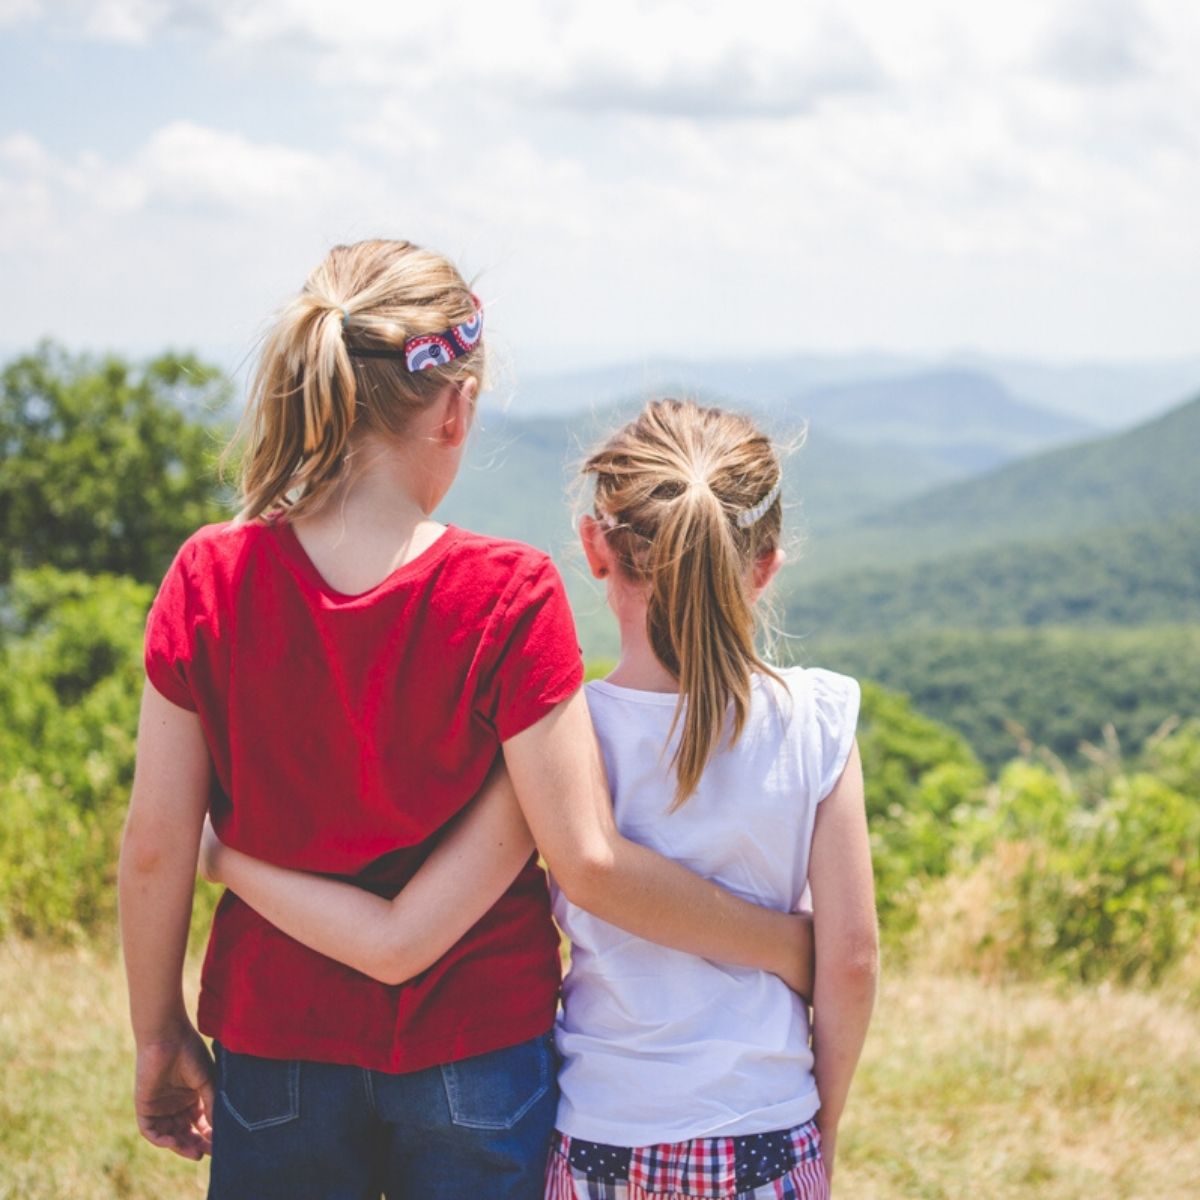 Two young girls have their arms around each other while looking out at the mountains.